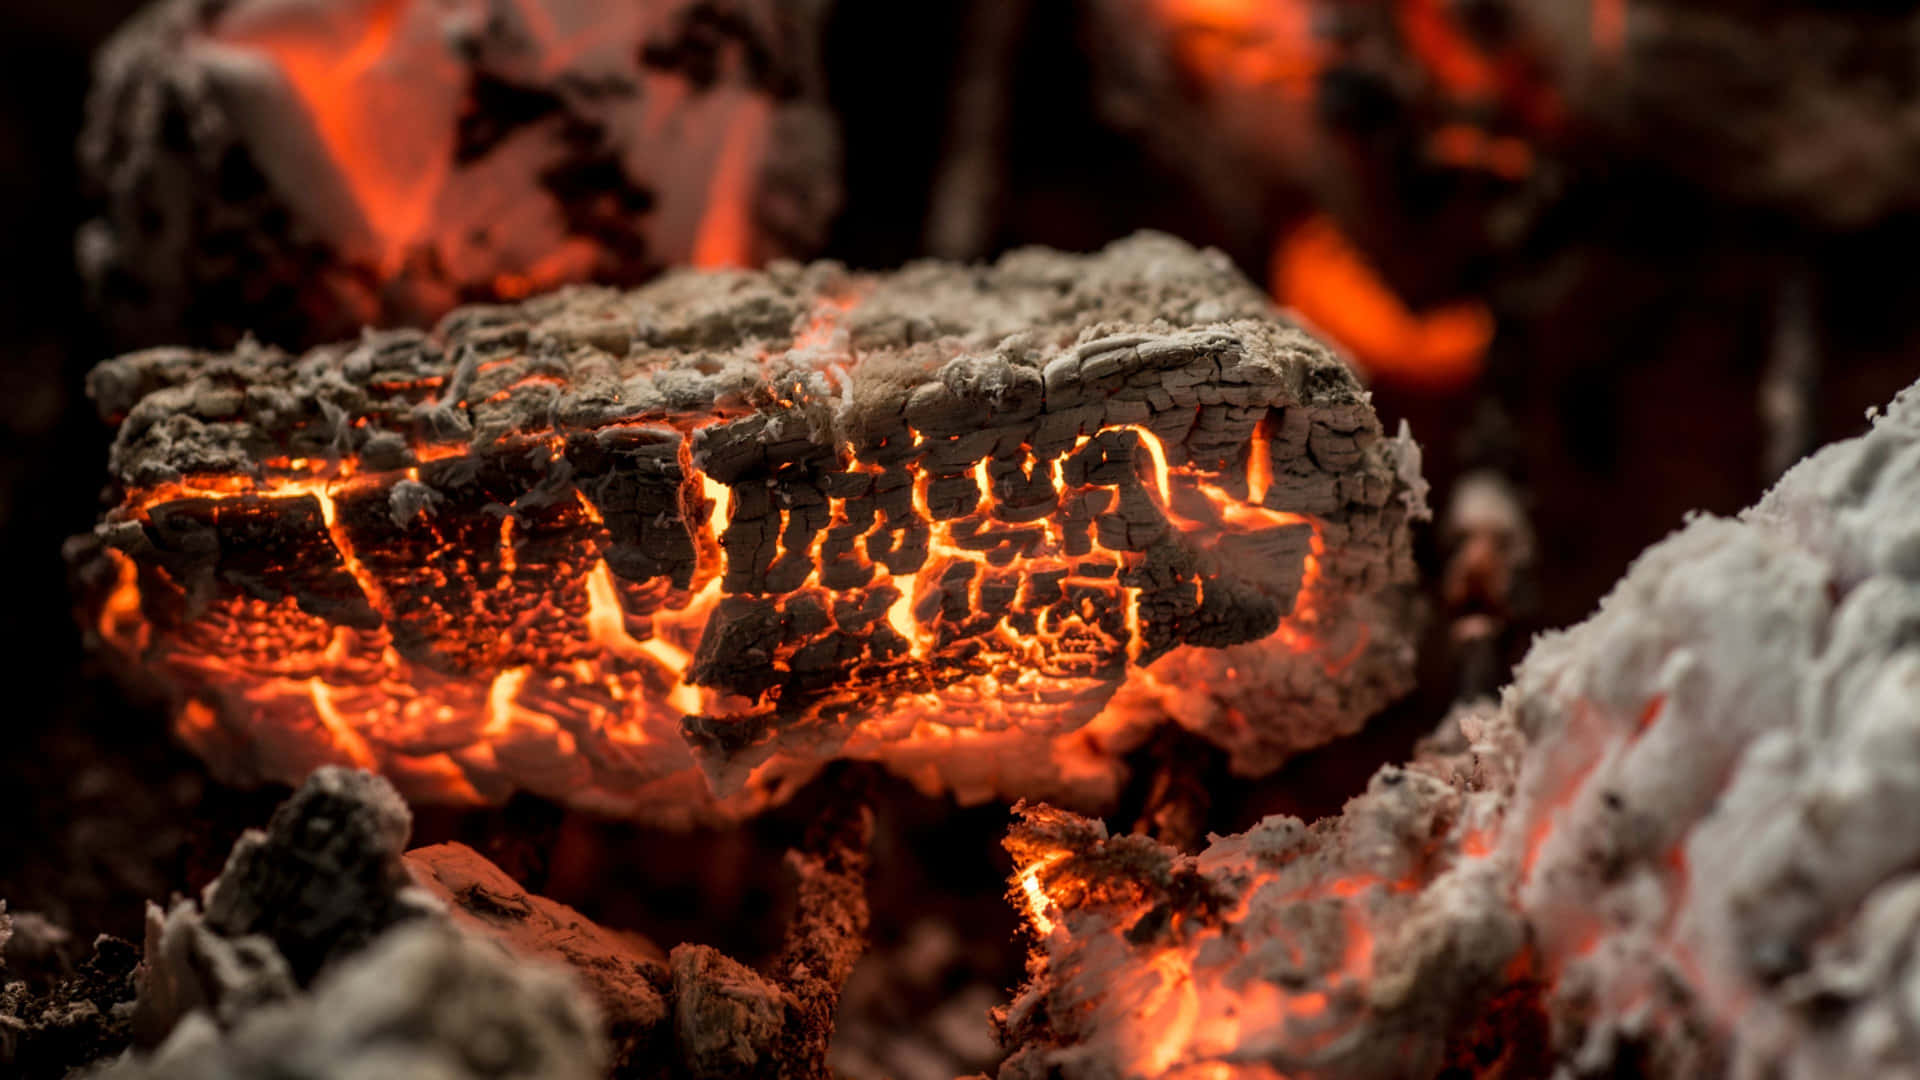 A Close Up Of A Fire With Coals And Fire